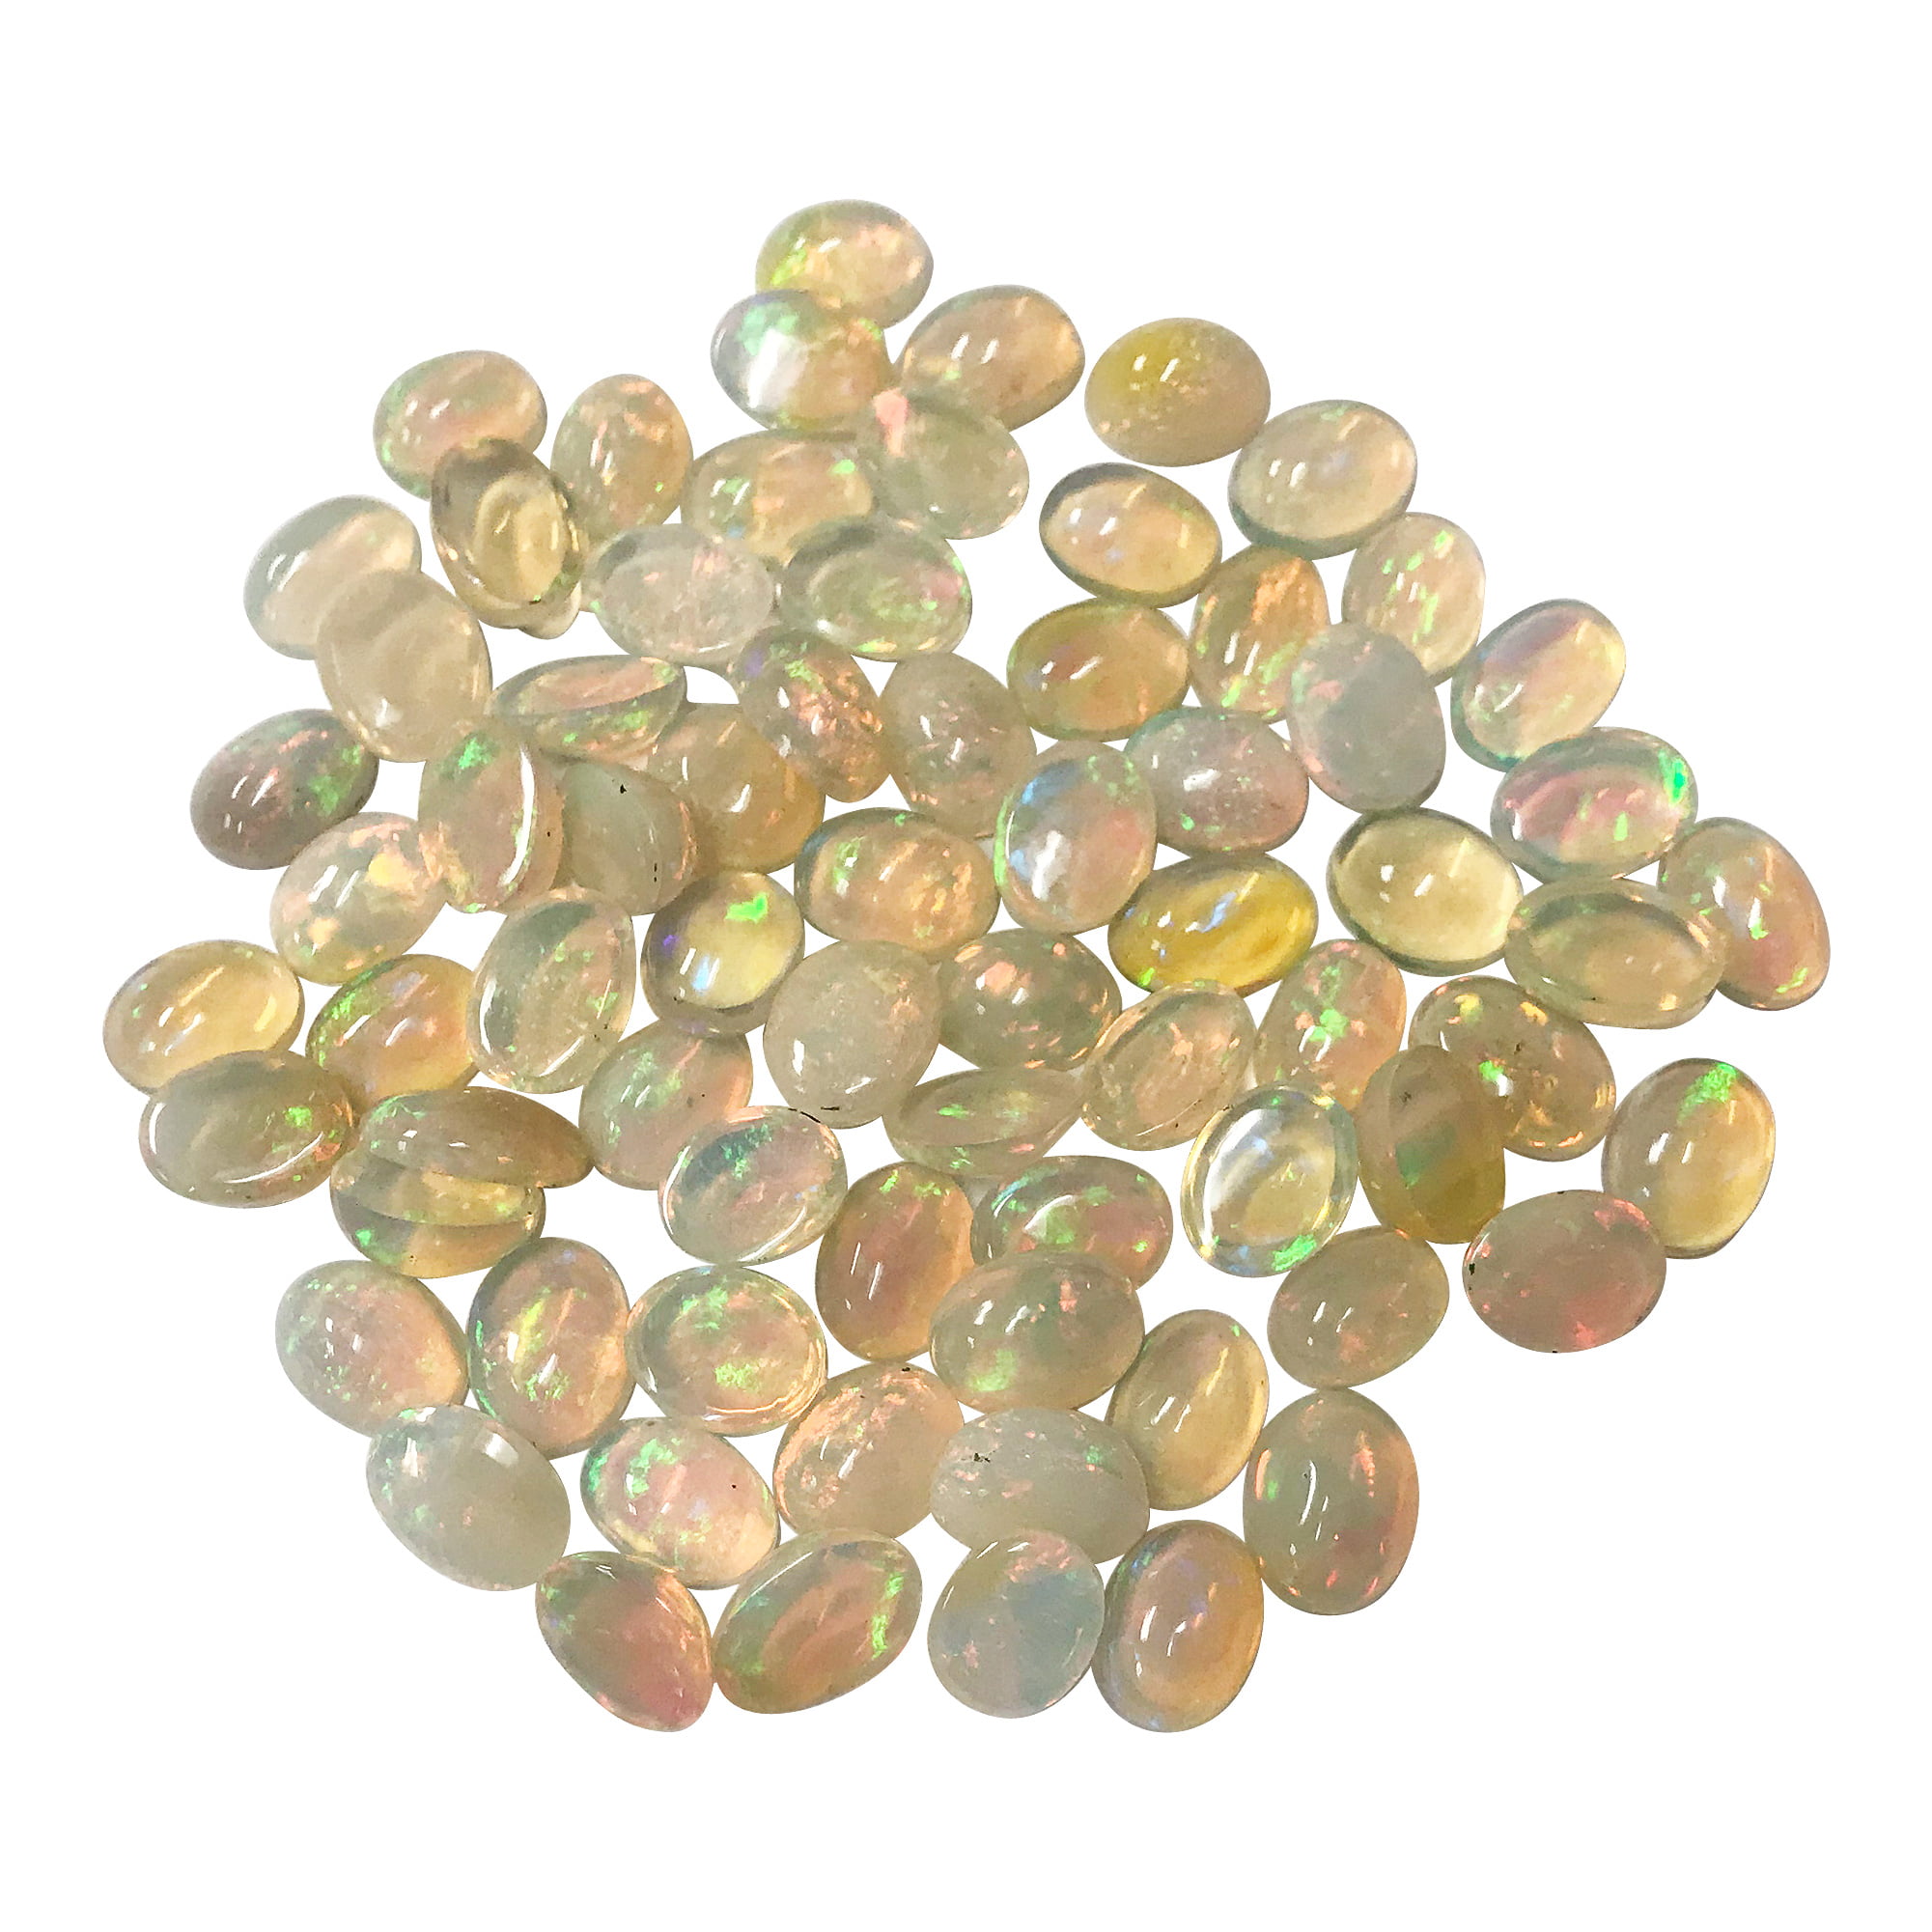 100% Natural Fire Power Ethiopian Opal Oval Cabochon Loose Gemstone Free Sapp. 